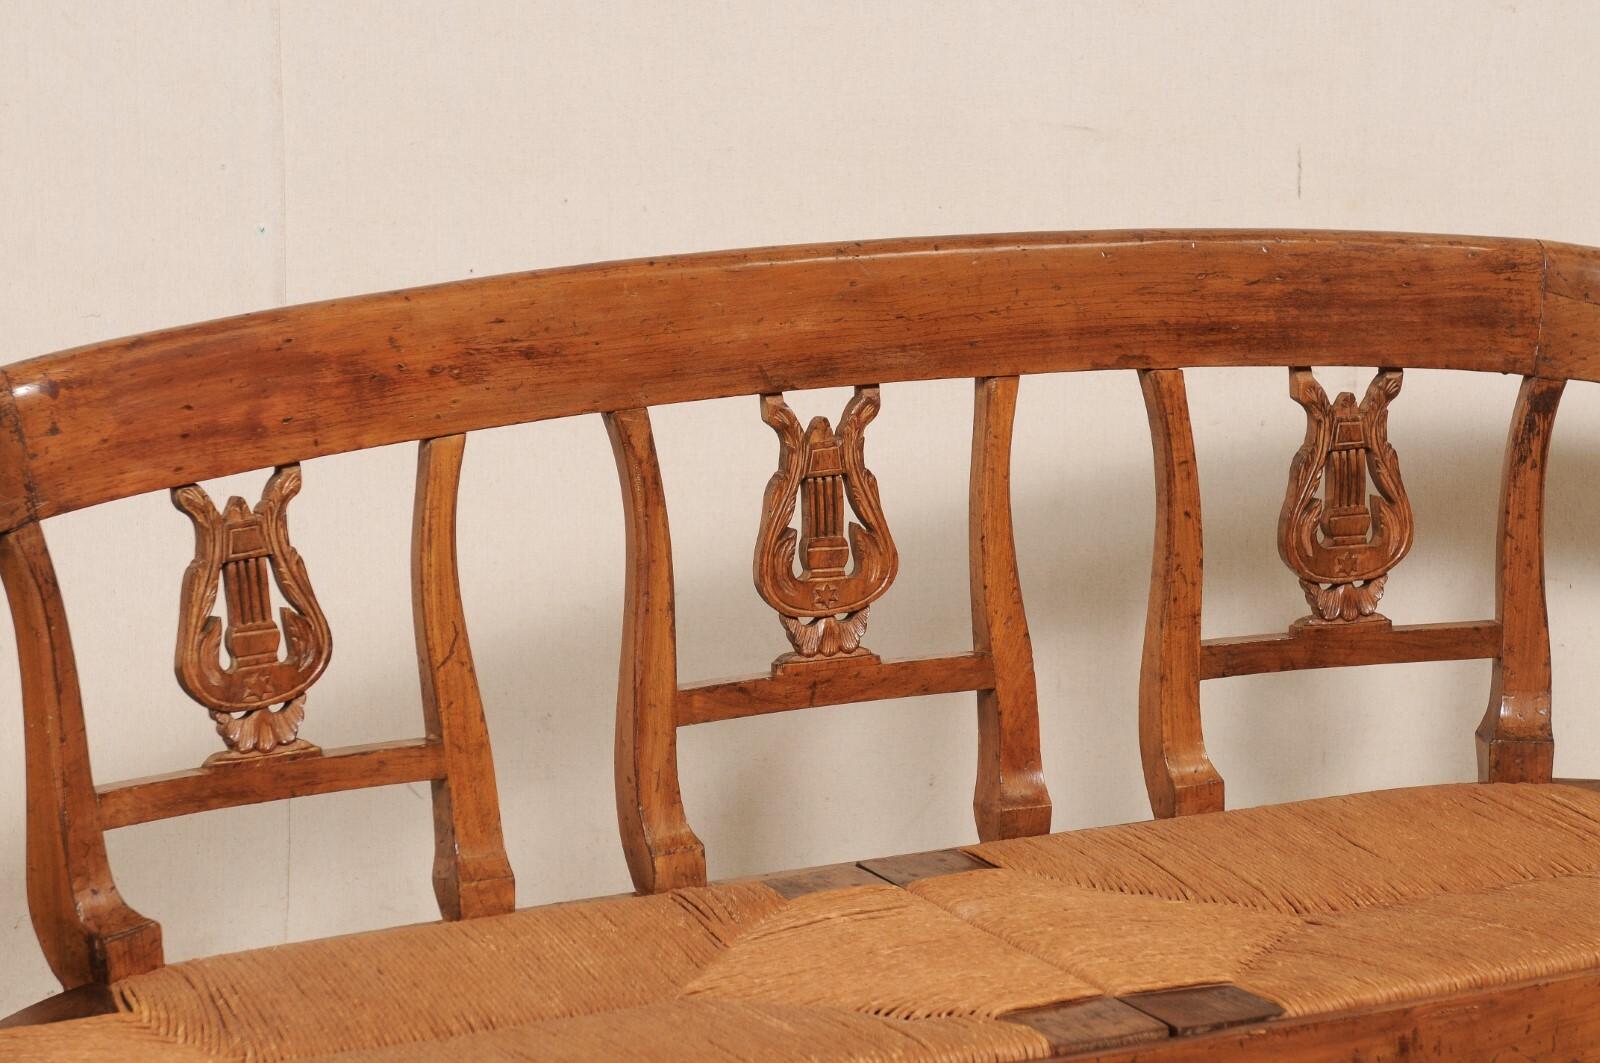 A French Neoclassic carved-wood sofa bench with rushed seat from the 19th century. This antique bench from France has been beautifully carved with Neoclassical details, featuring a gracefully curved top rail which gives way to an open back with